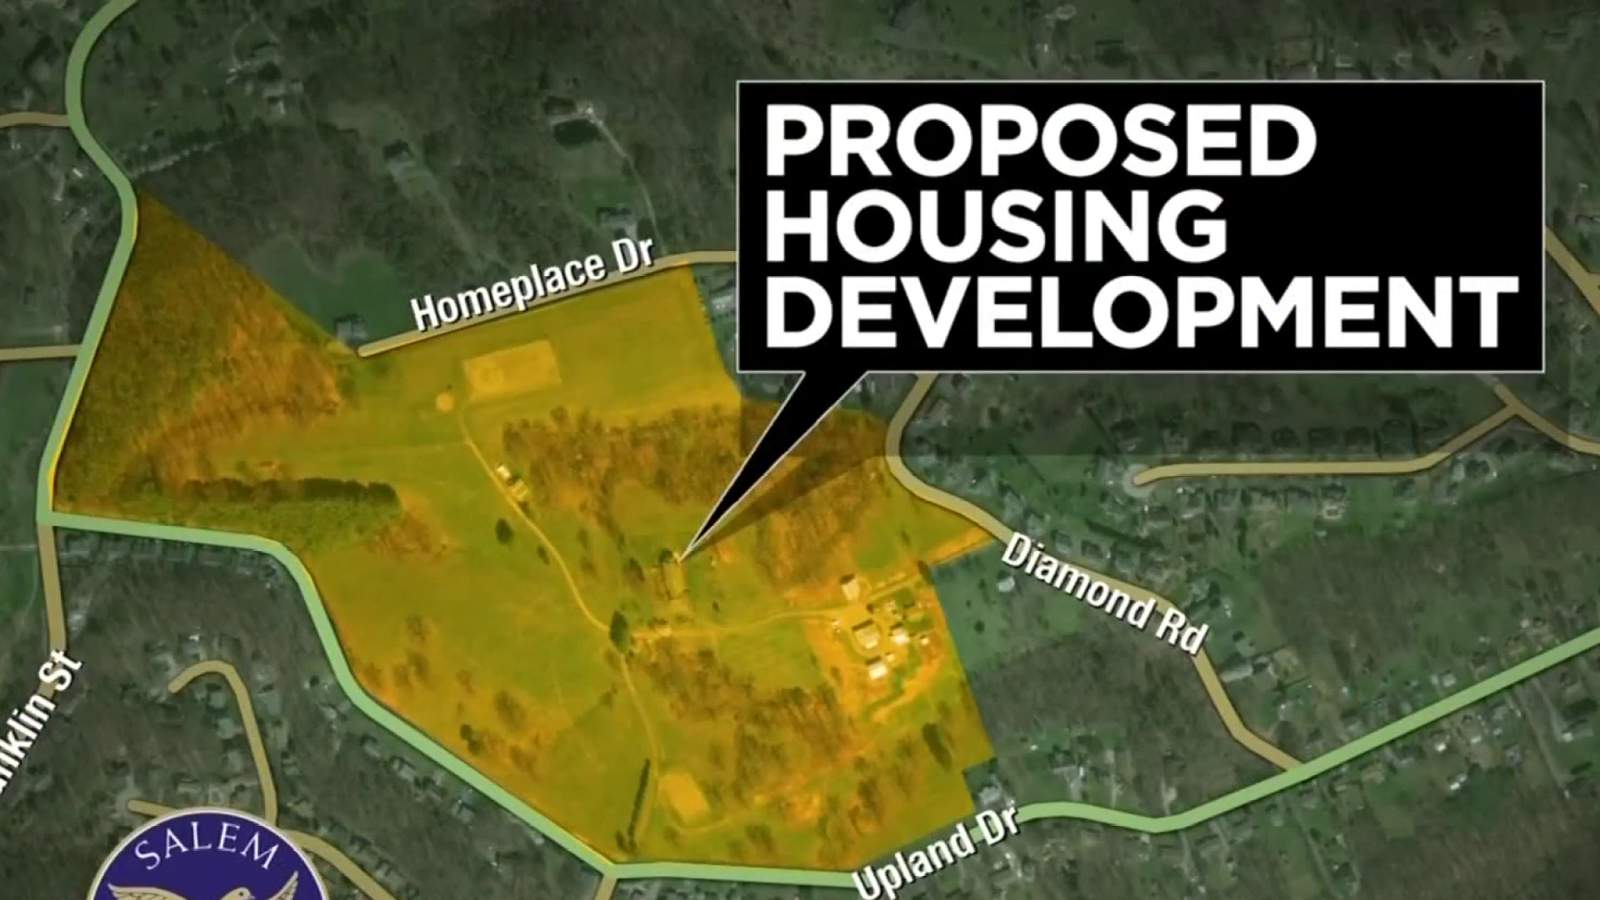 Salem City Council approves controversial requests to build subdivision on old farm land